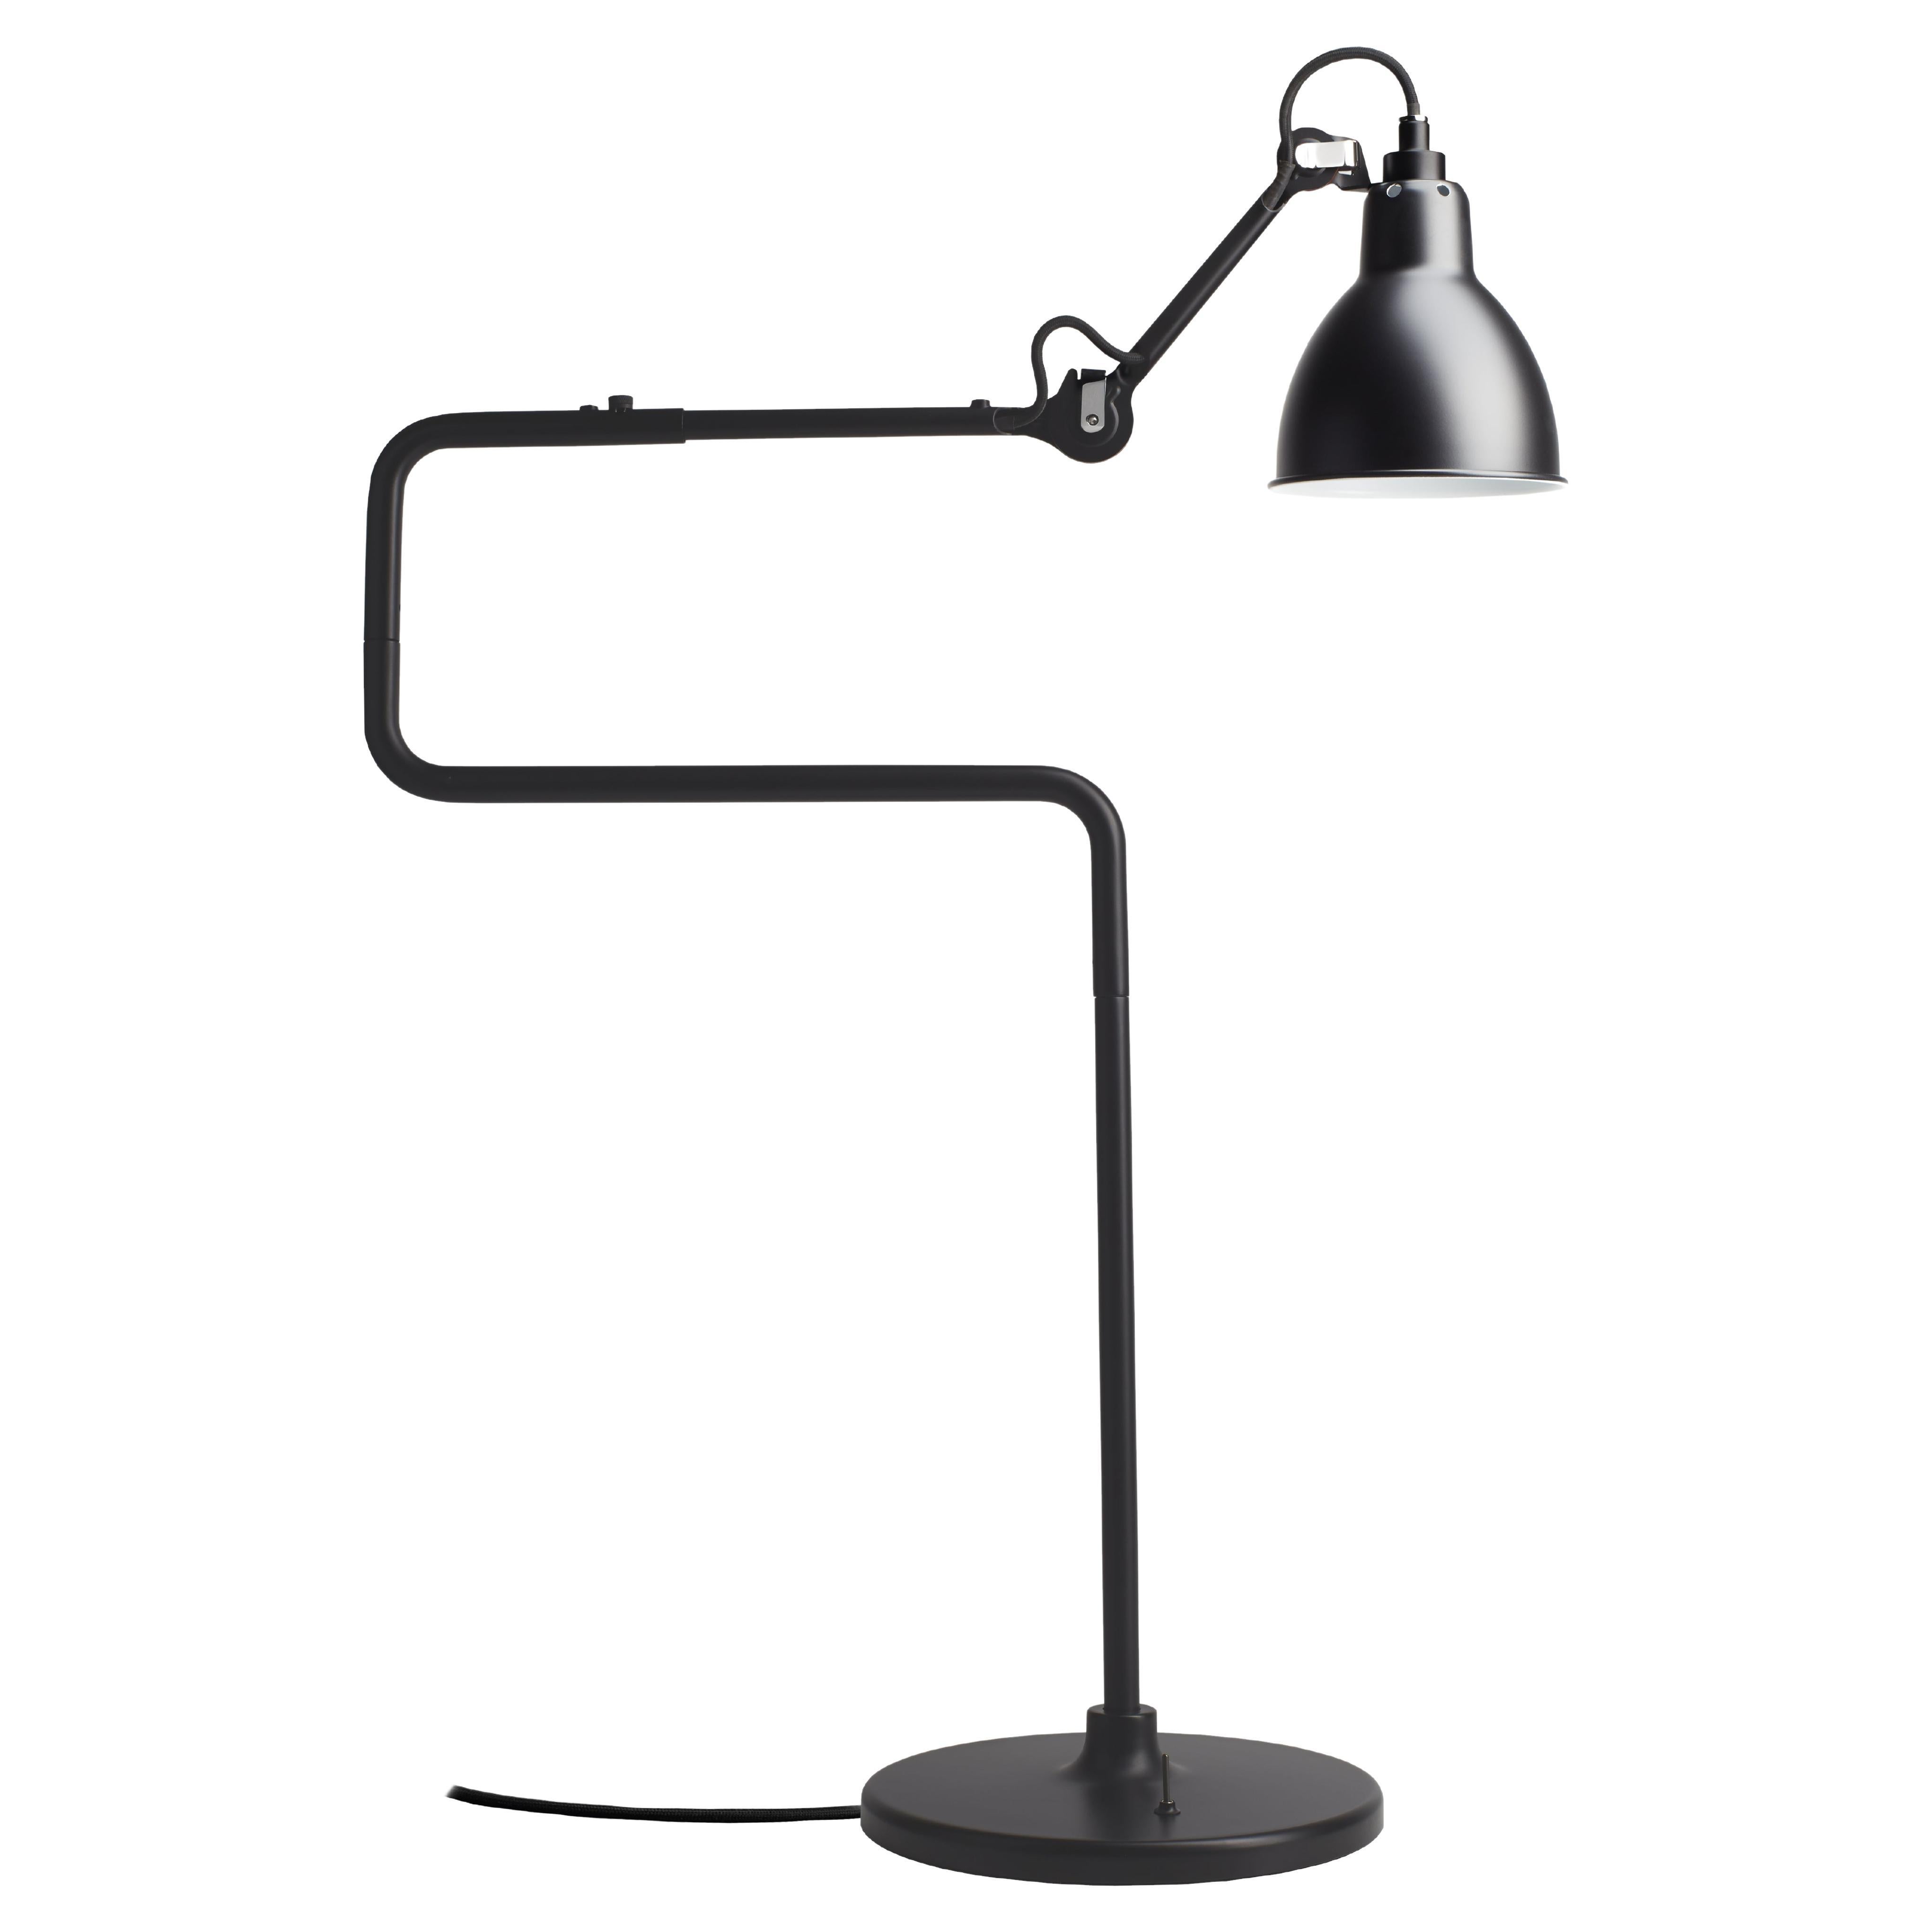 DCW Editions La Lampe Gras N°317 Table Lamp in Black Arm with Black Shade